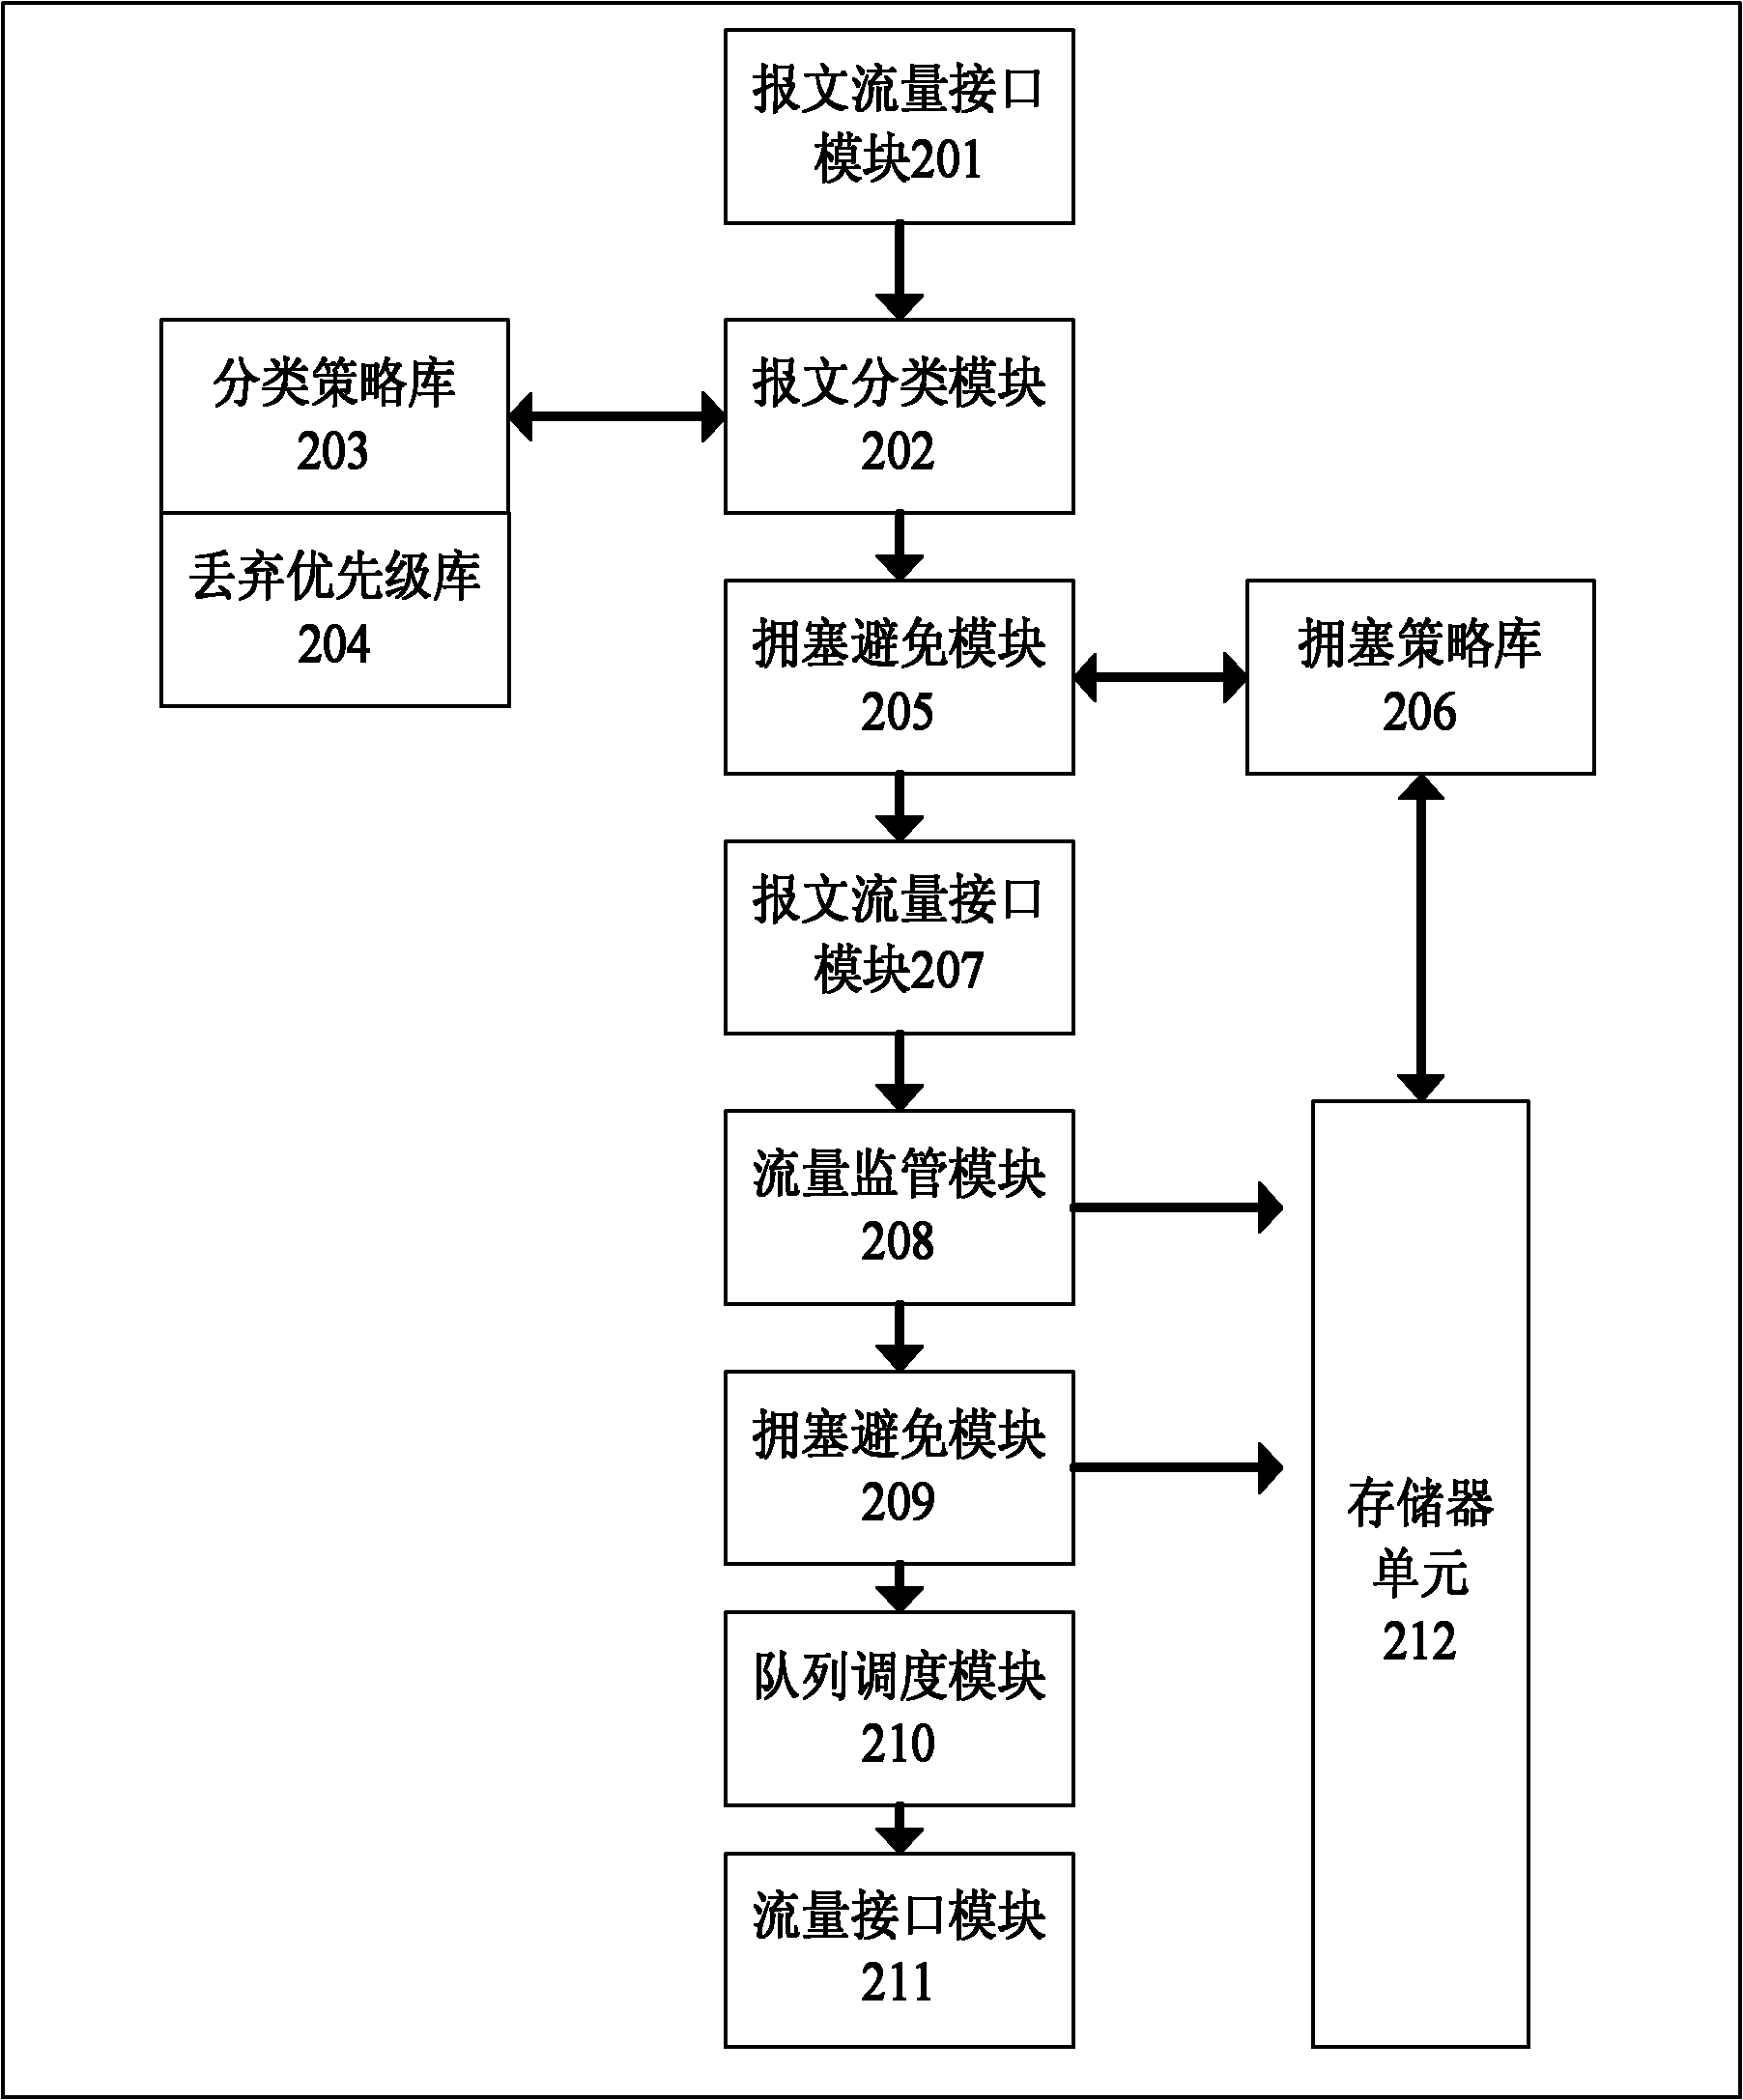 Method and system for preventing message congestion